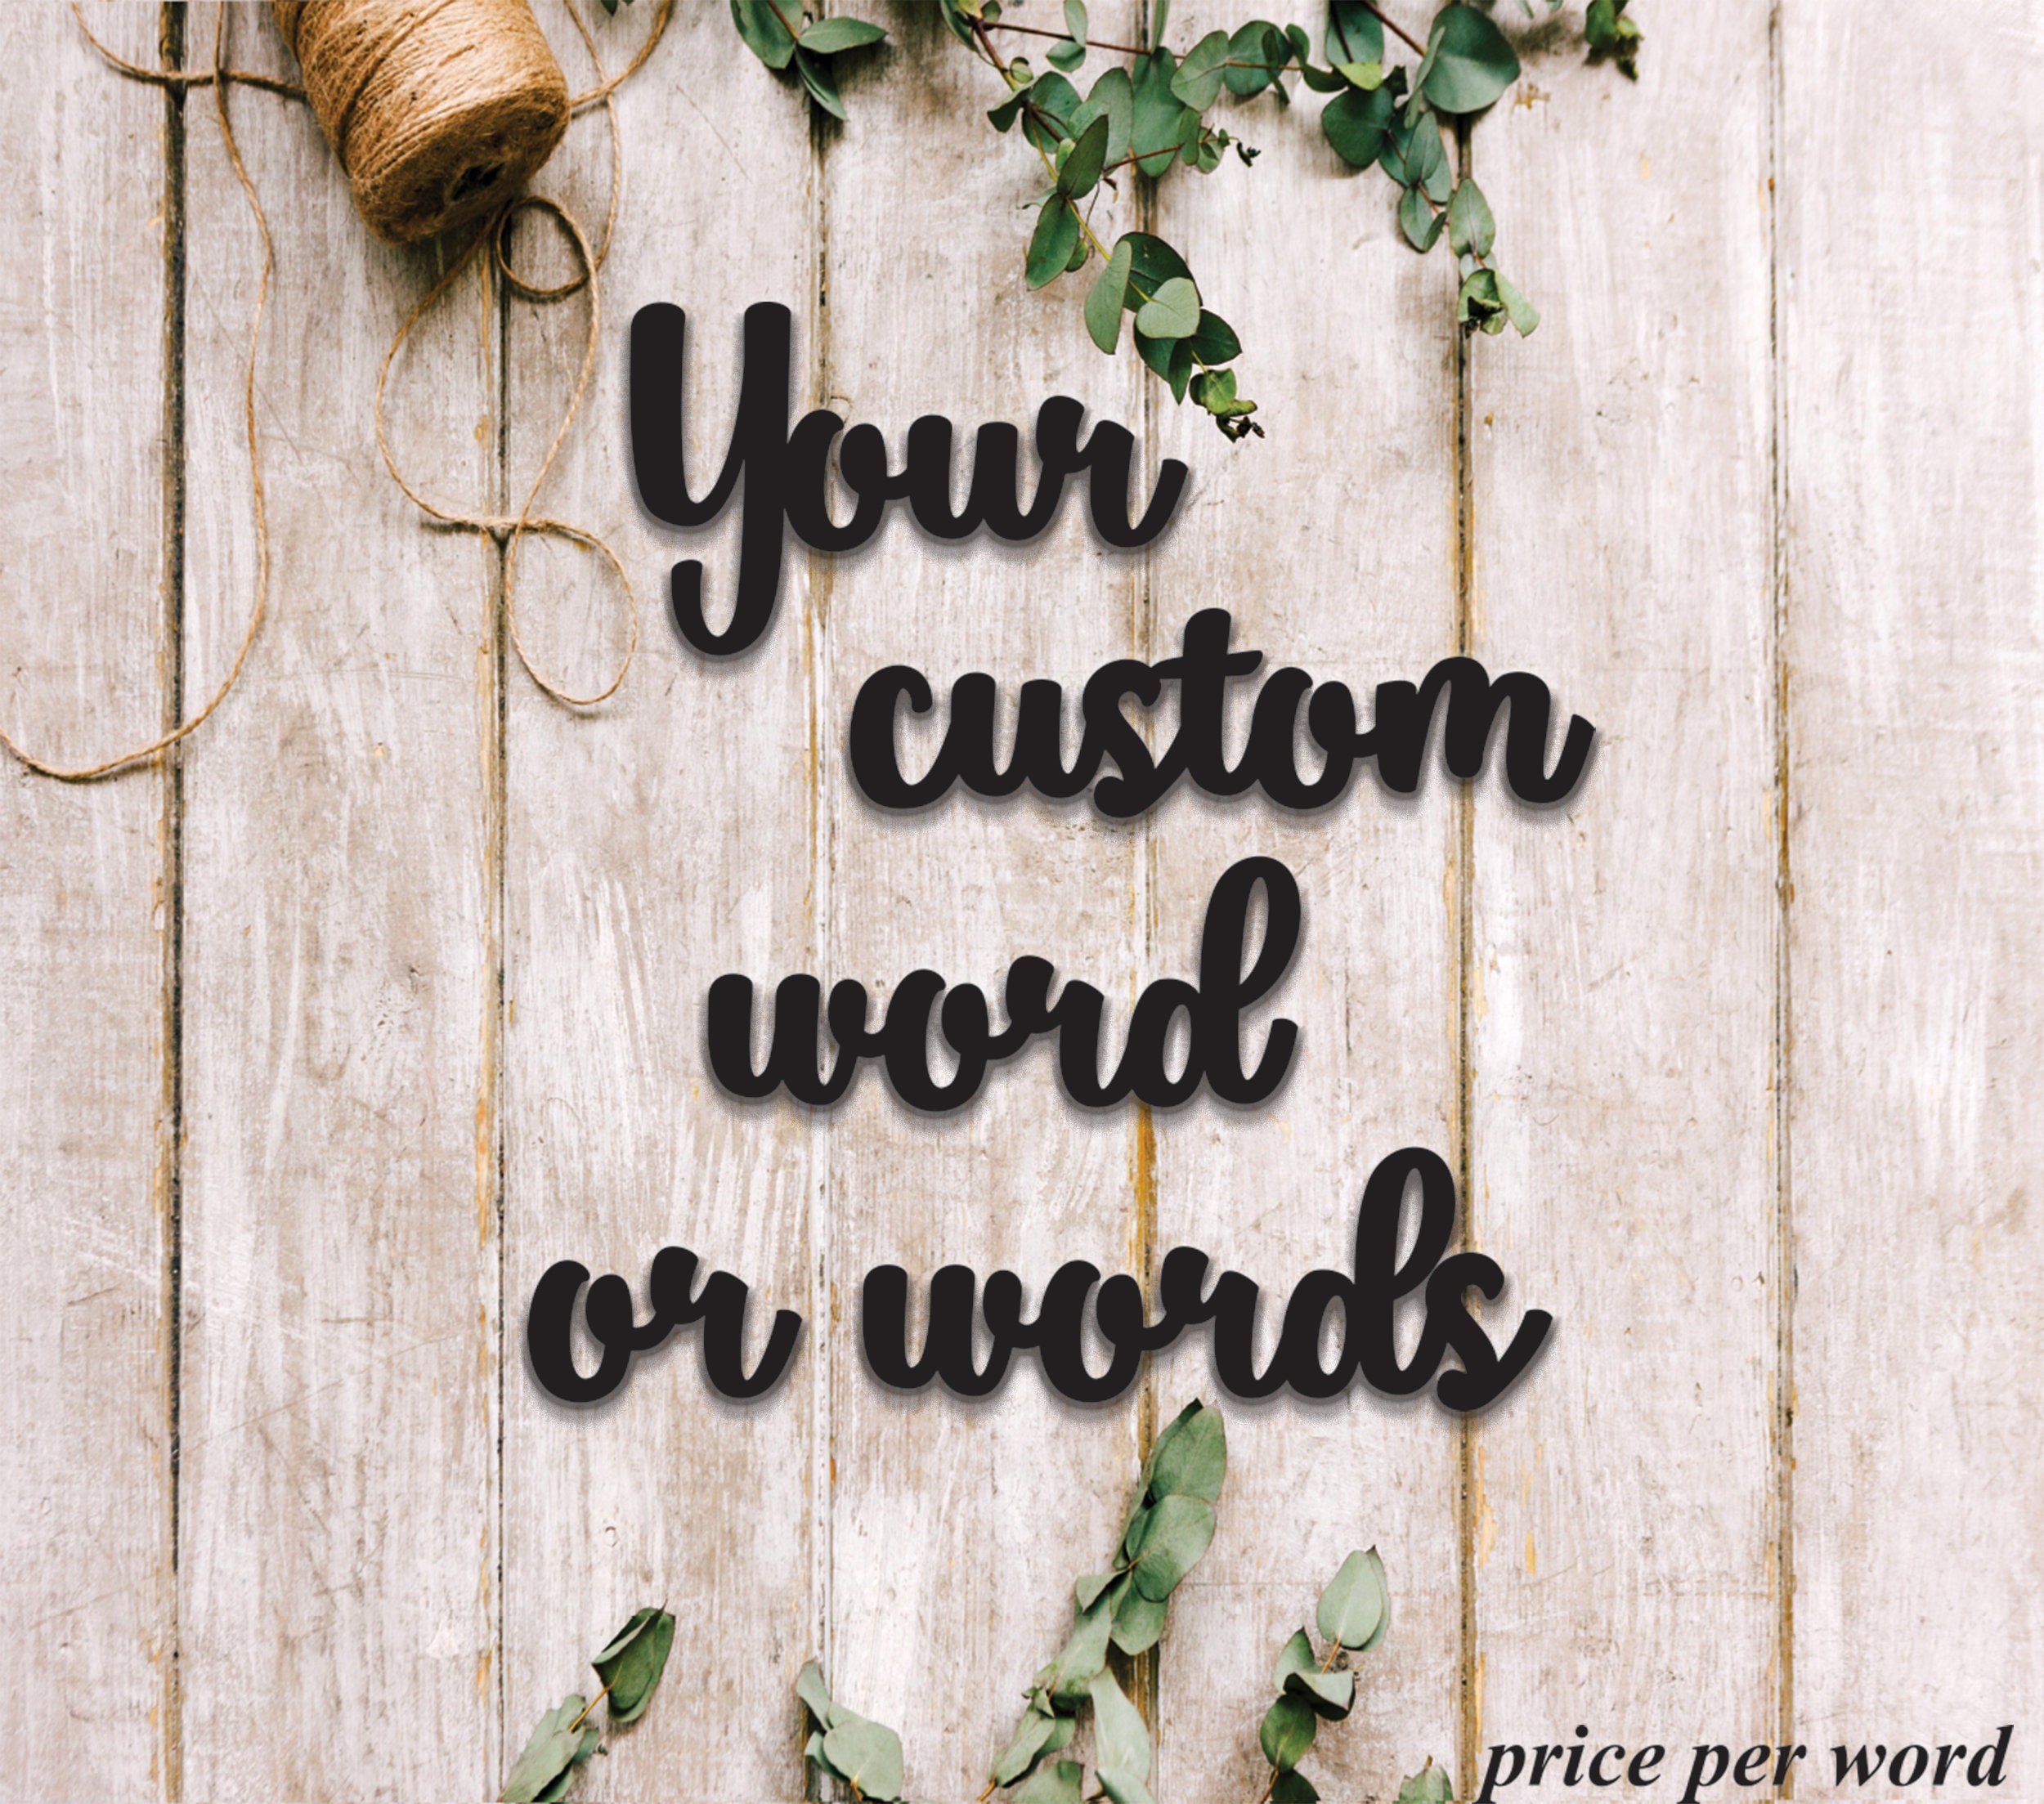 Handcrafted Decor: Create Beautiful Wooden Words for Your Home